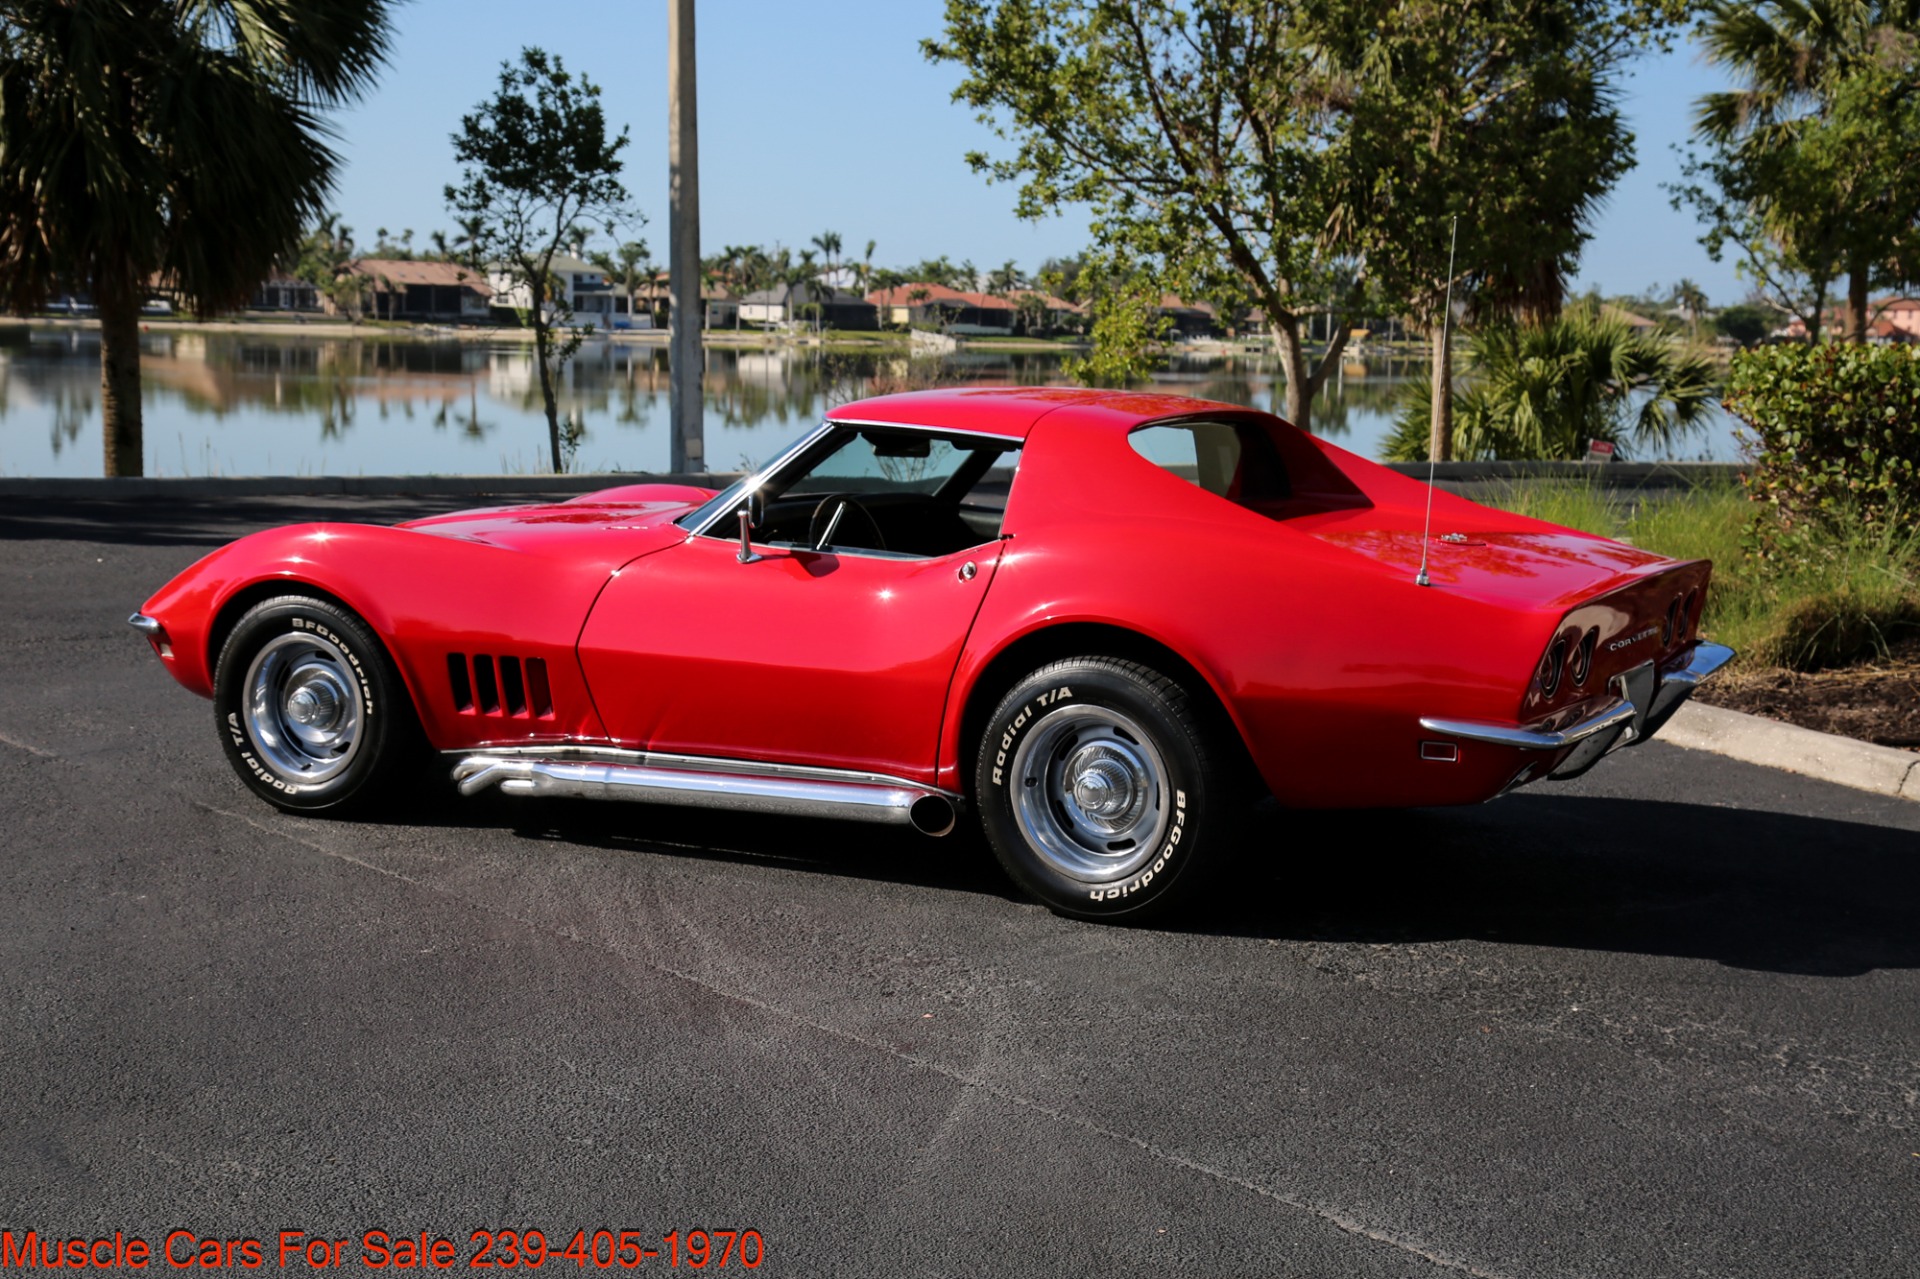 Used 1968 Chevrolet Corvette Stingray for sale $34,500 at Muscle Cars for Sale Inc. in Fort Myers FL 33912 5